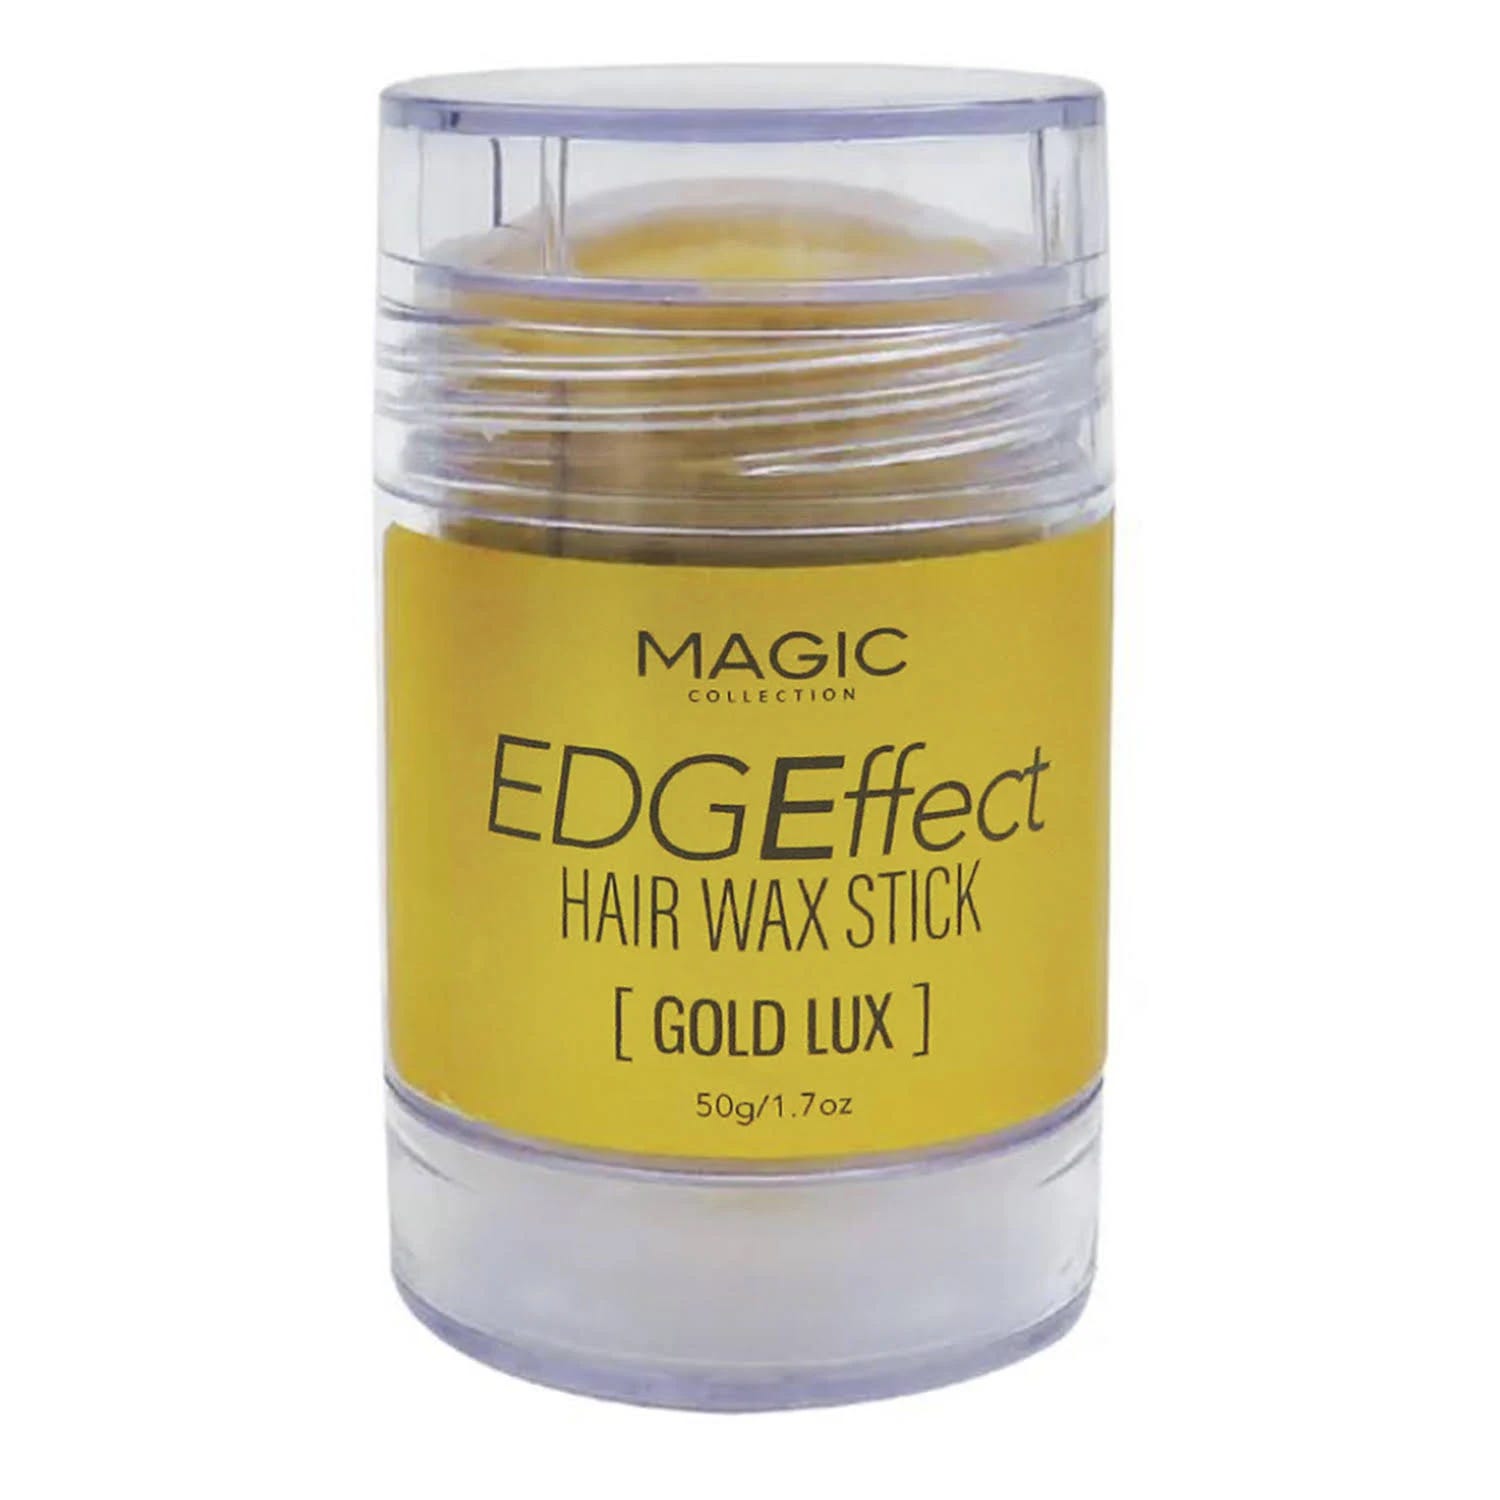 Pure Hair Wax Stick for Styling and Precision | Image